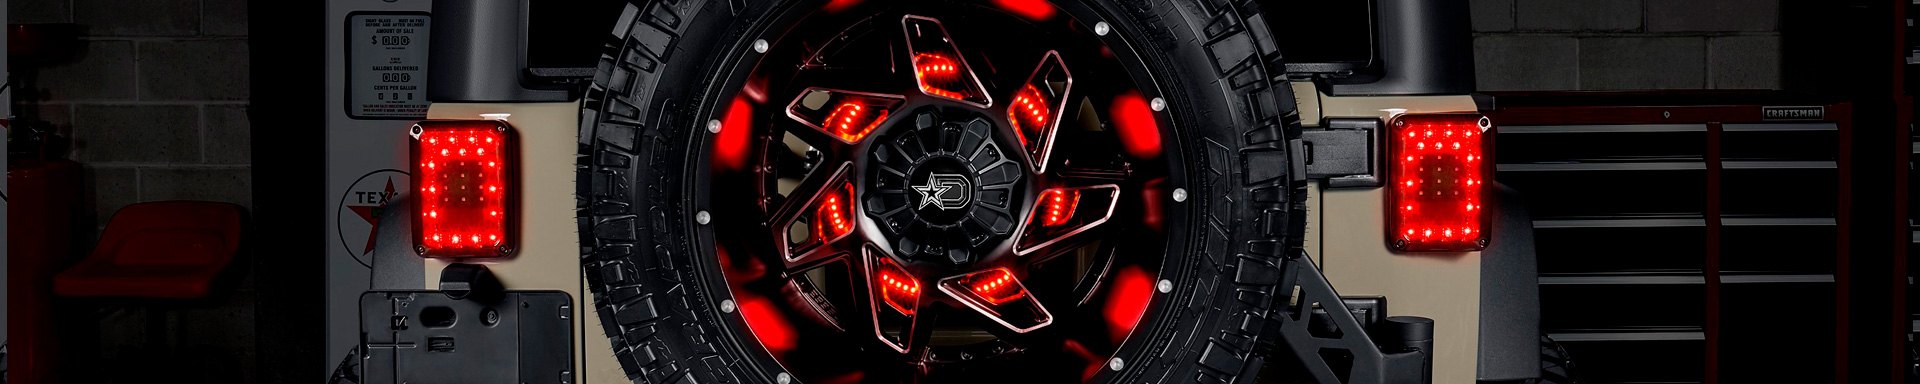 Roll Into The Wilderness In Style With All-New Lumen LED Spare Tire Carrier Lights